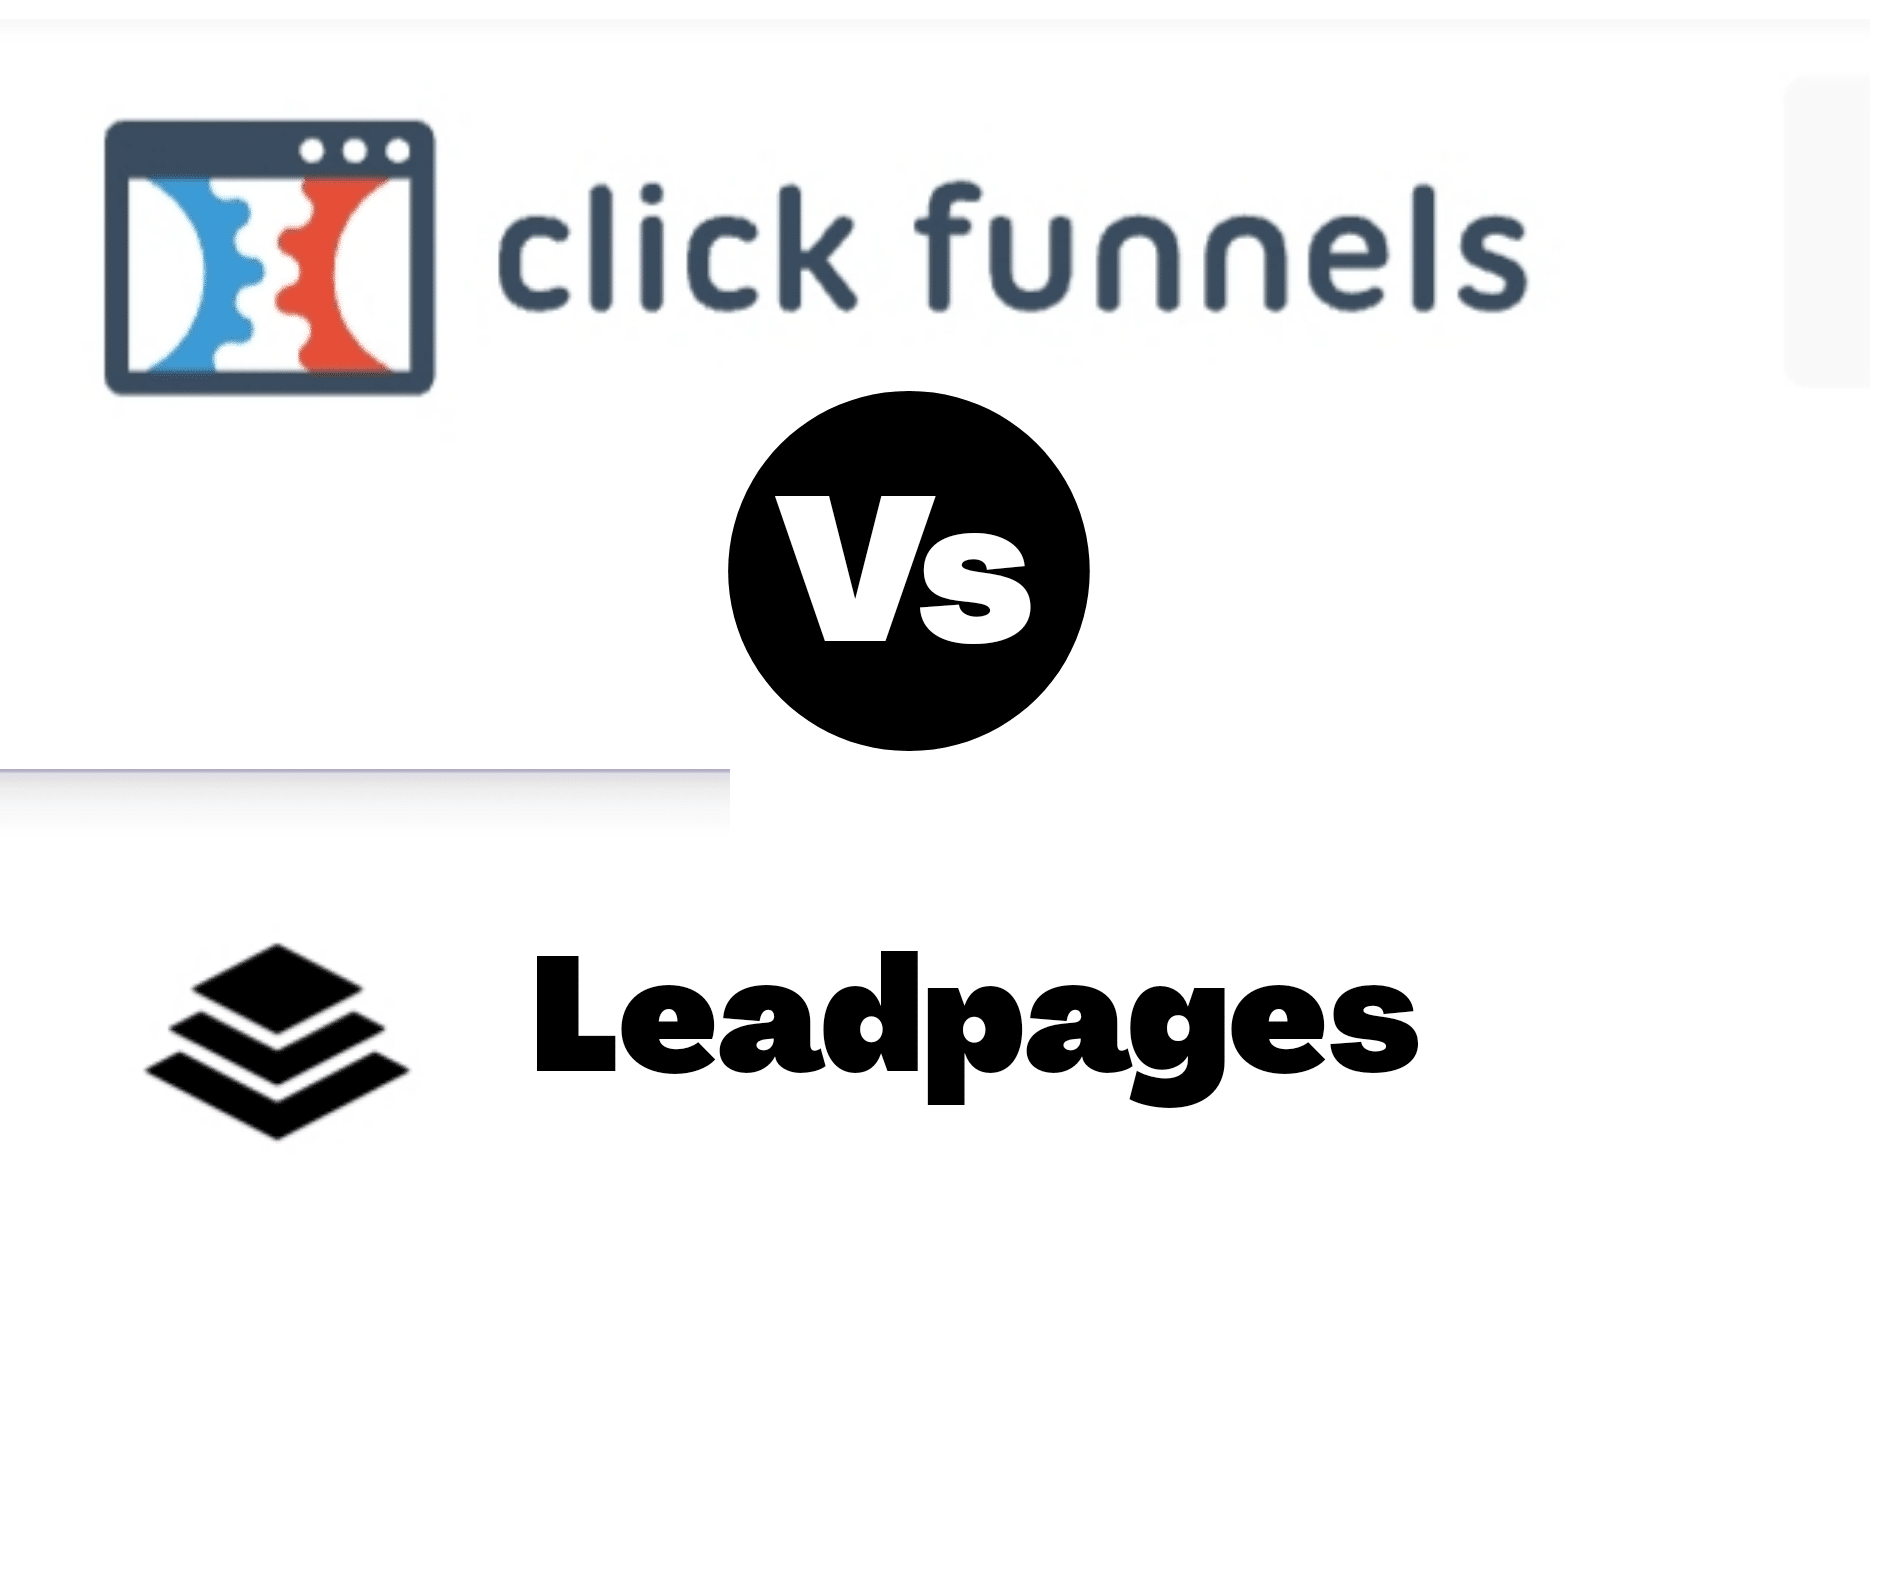 Clickfunnels Vs Leadpages